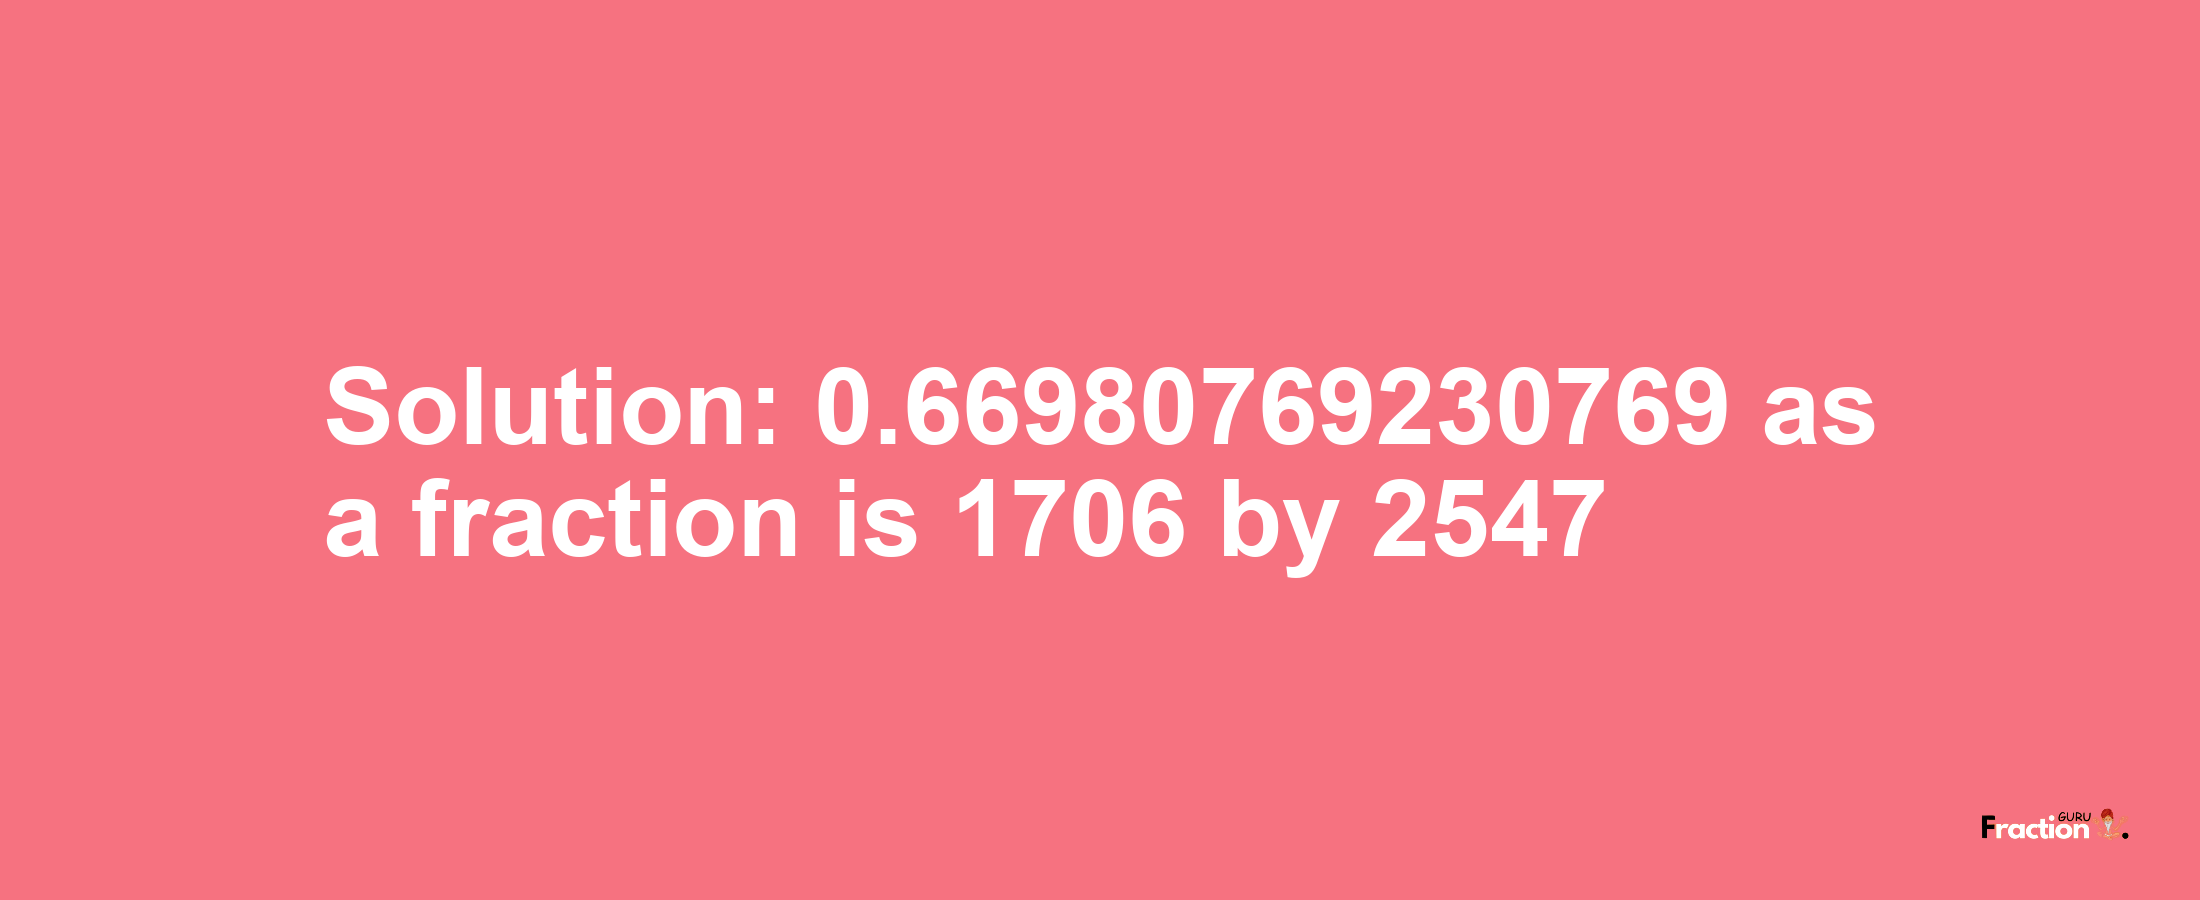 Solution:0.66980769230769 as a fraction is 1706/2547